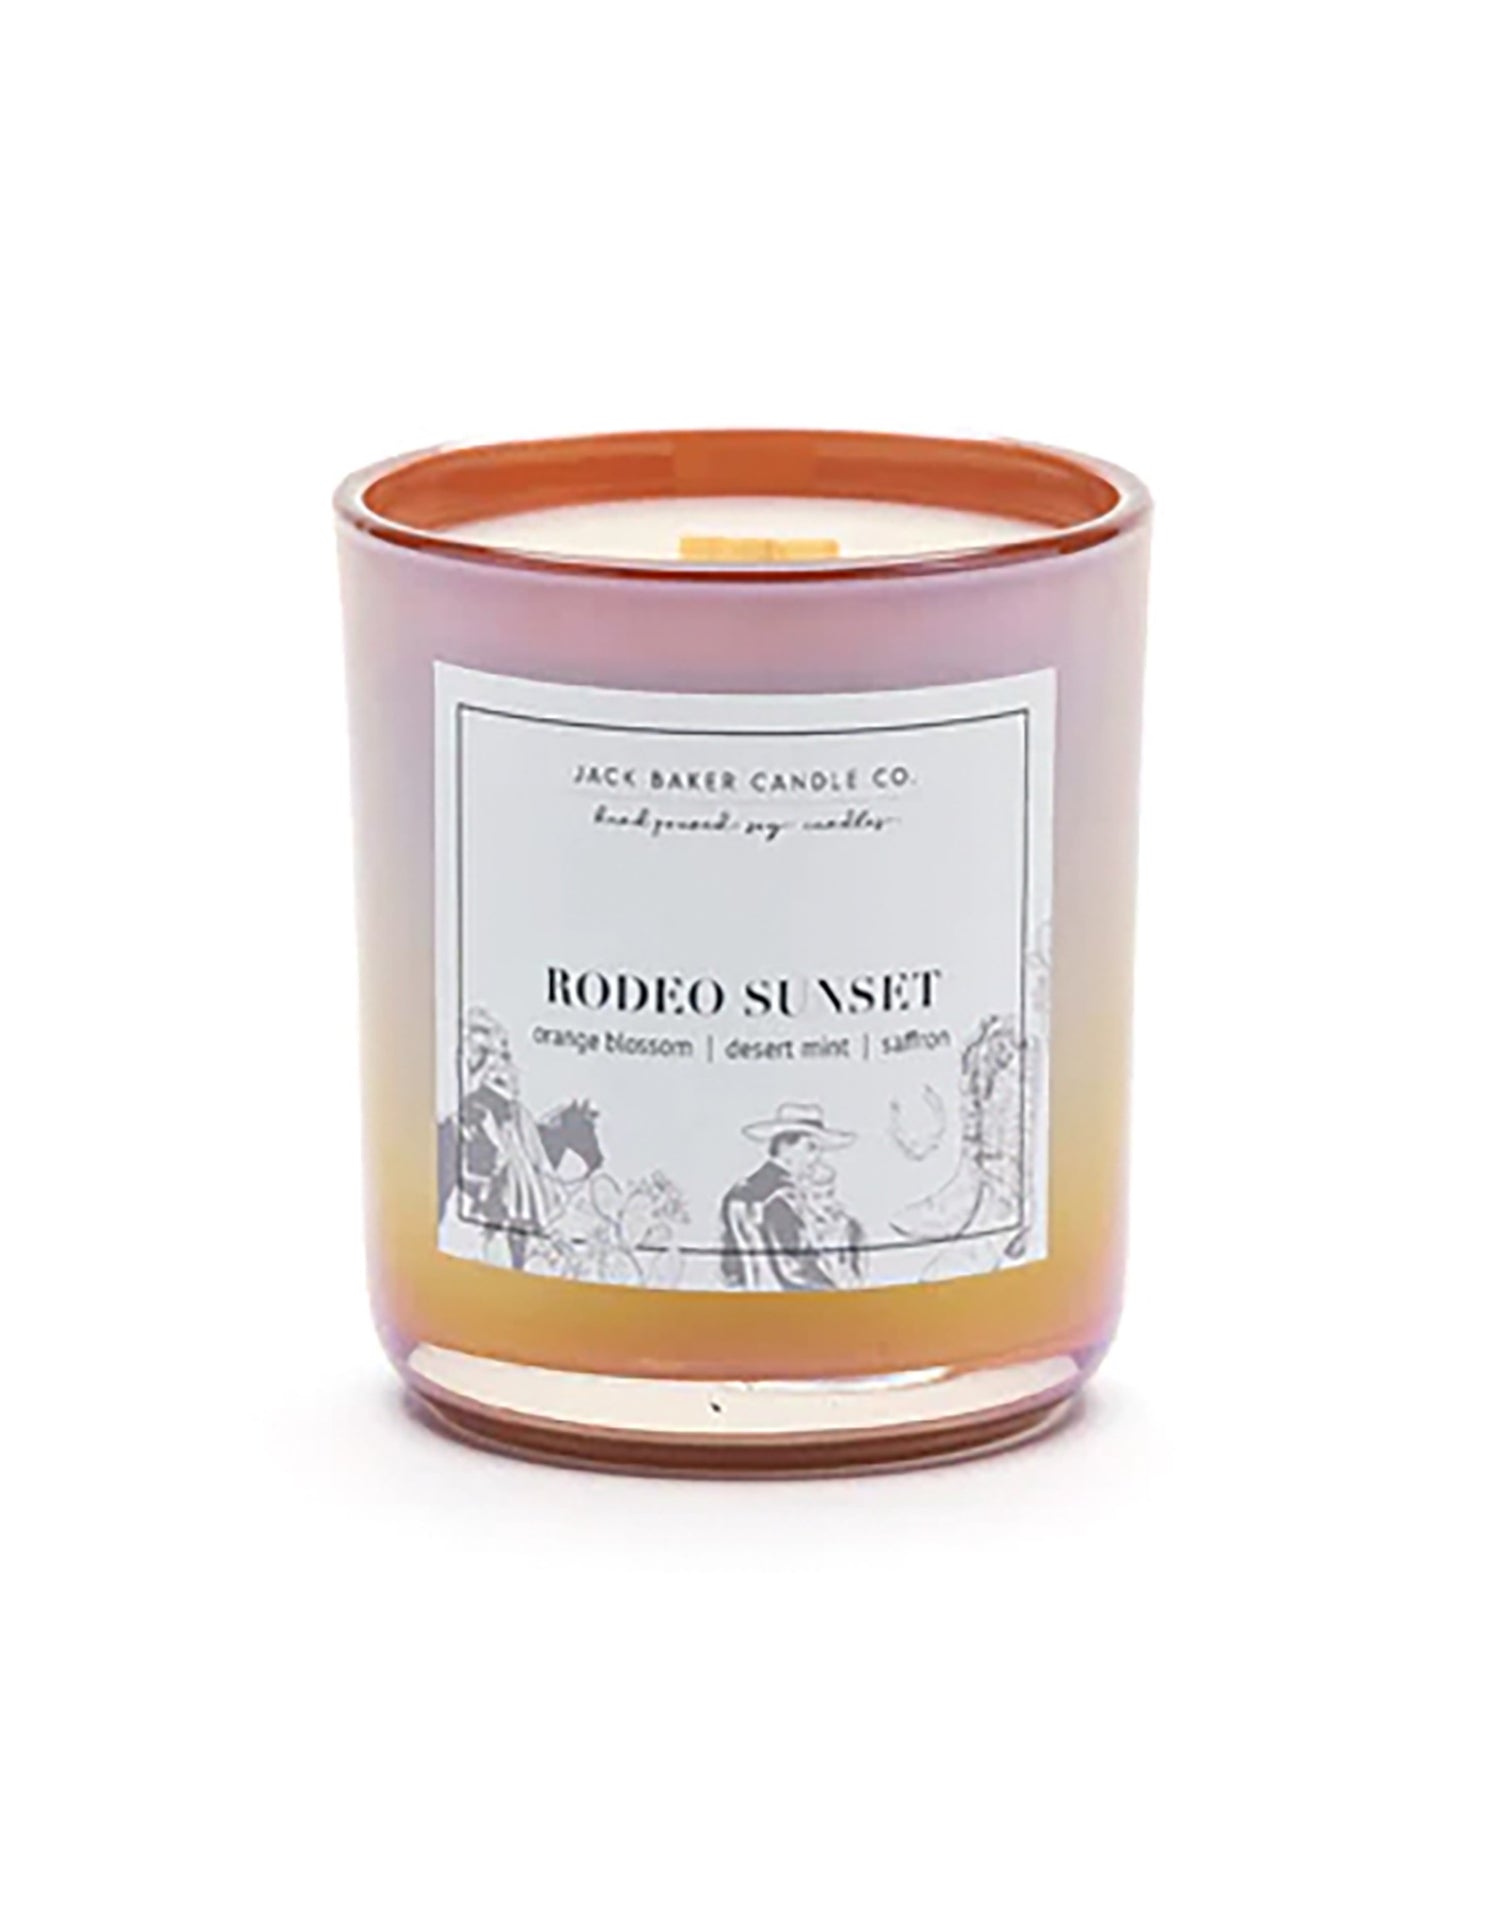 Rodeo Sunset Candle by Jack Baker Candle Co. - Product View